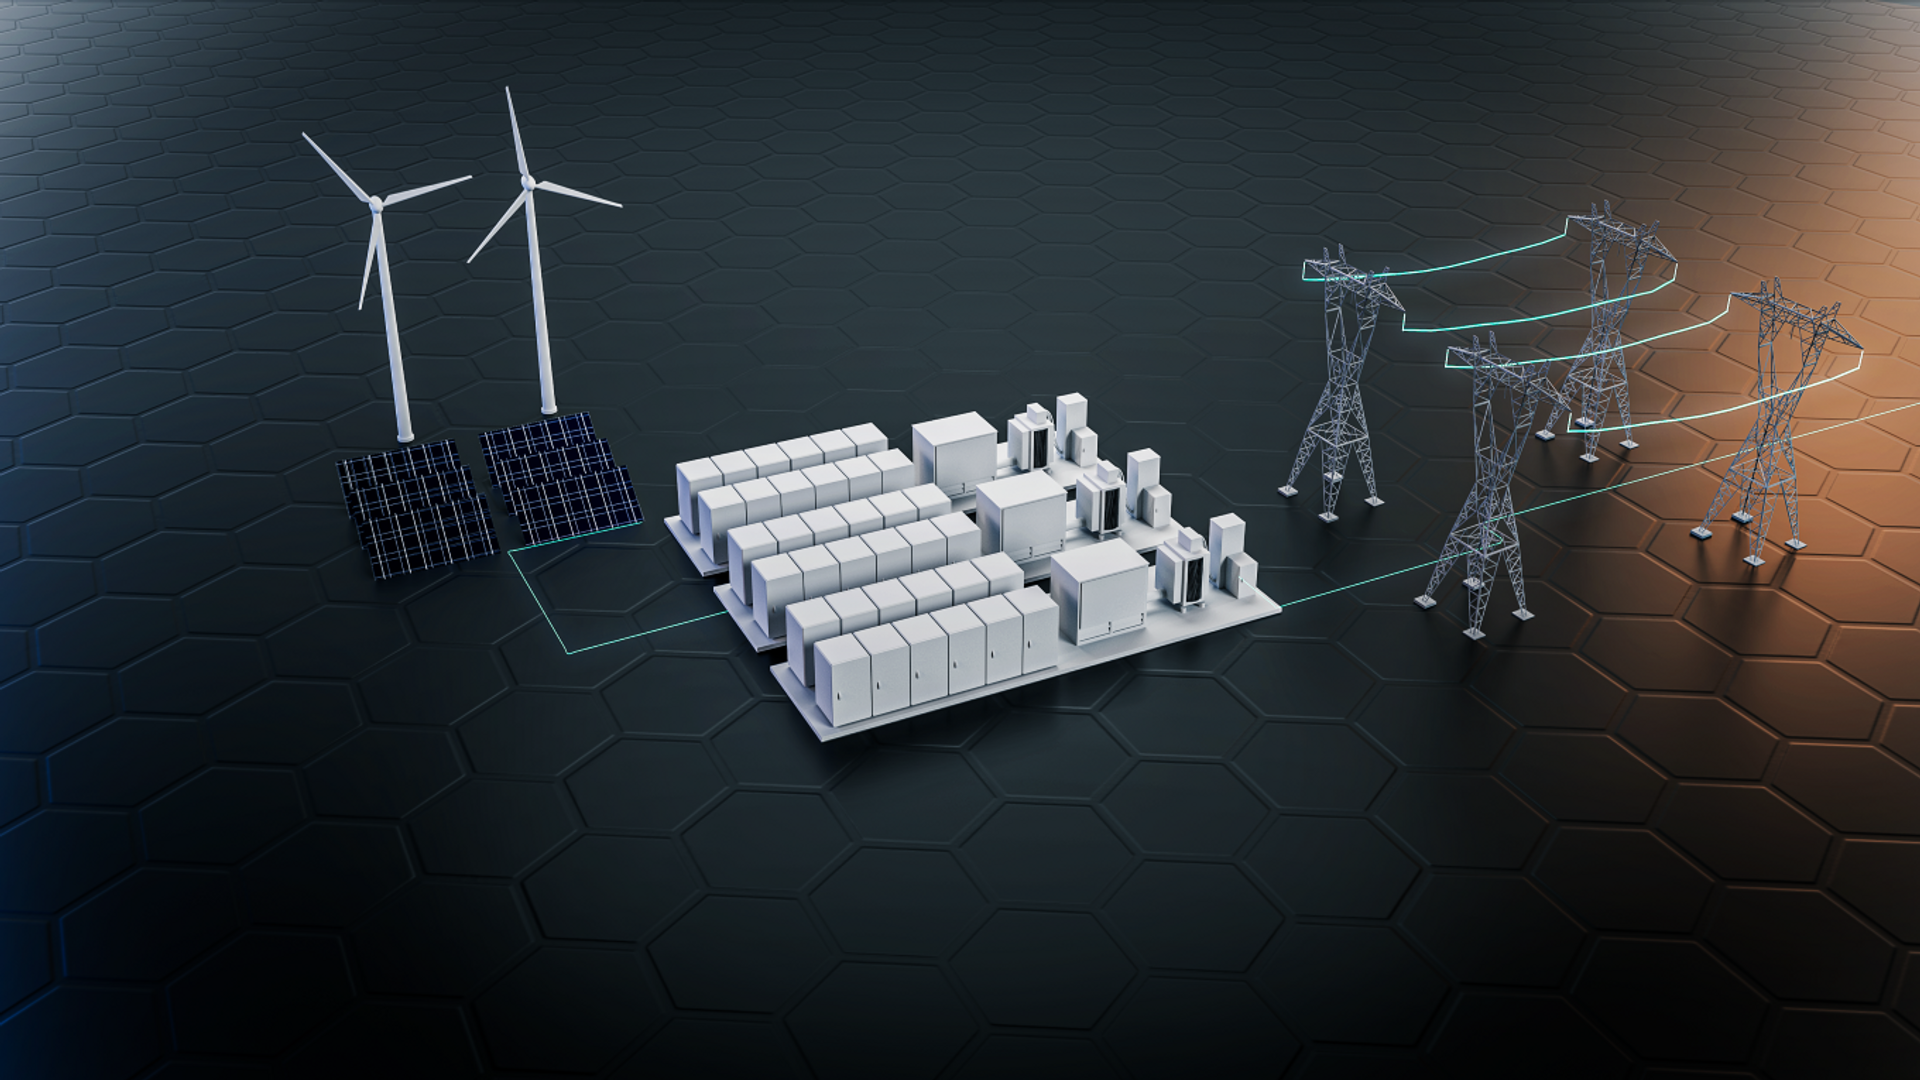 Illustration of battery storage modules with wind turbines and power lines